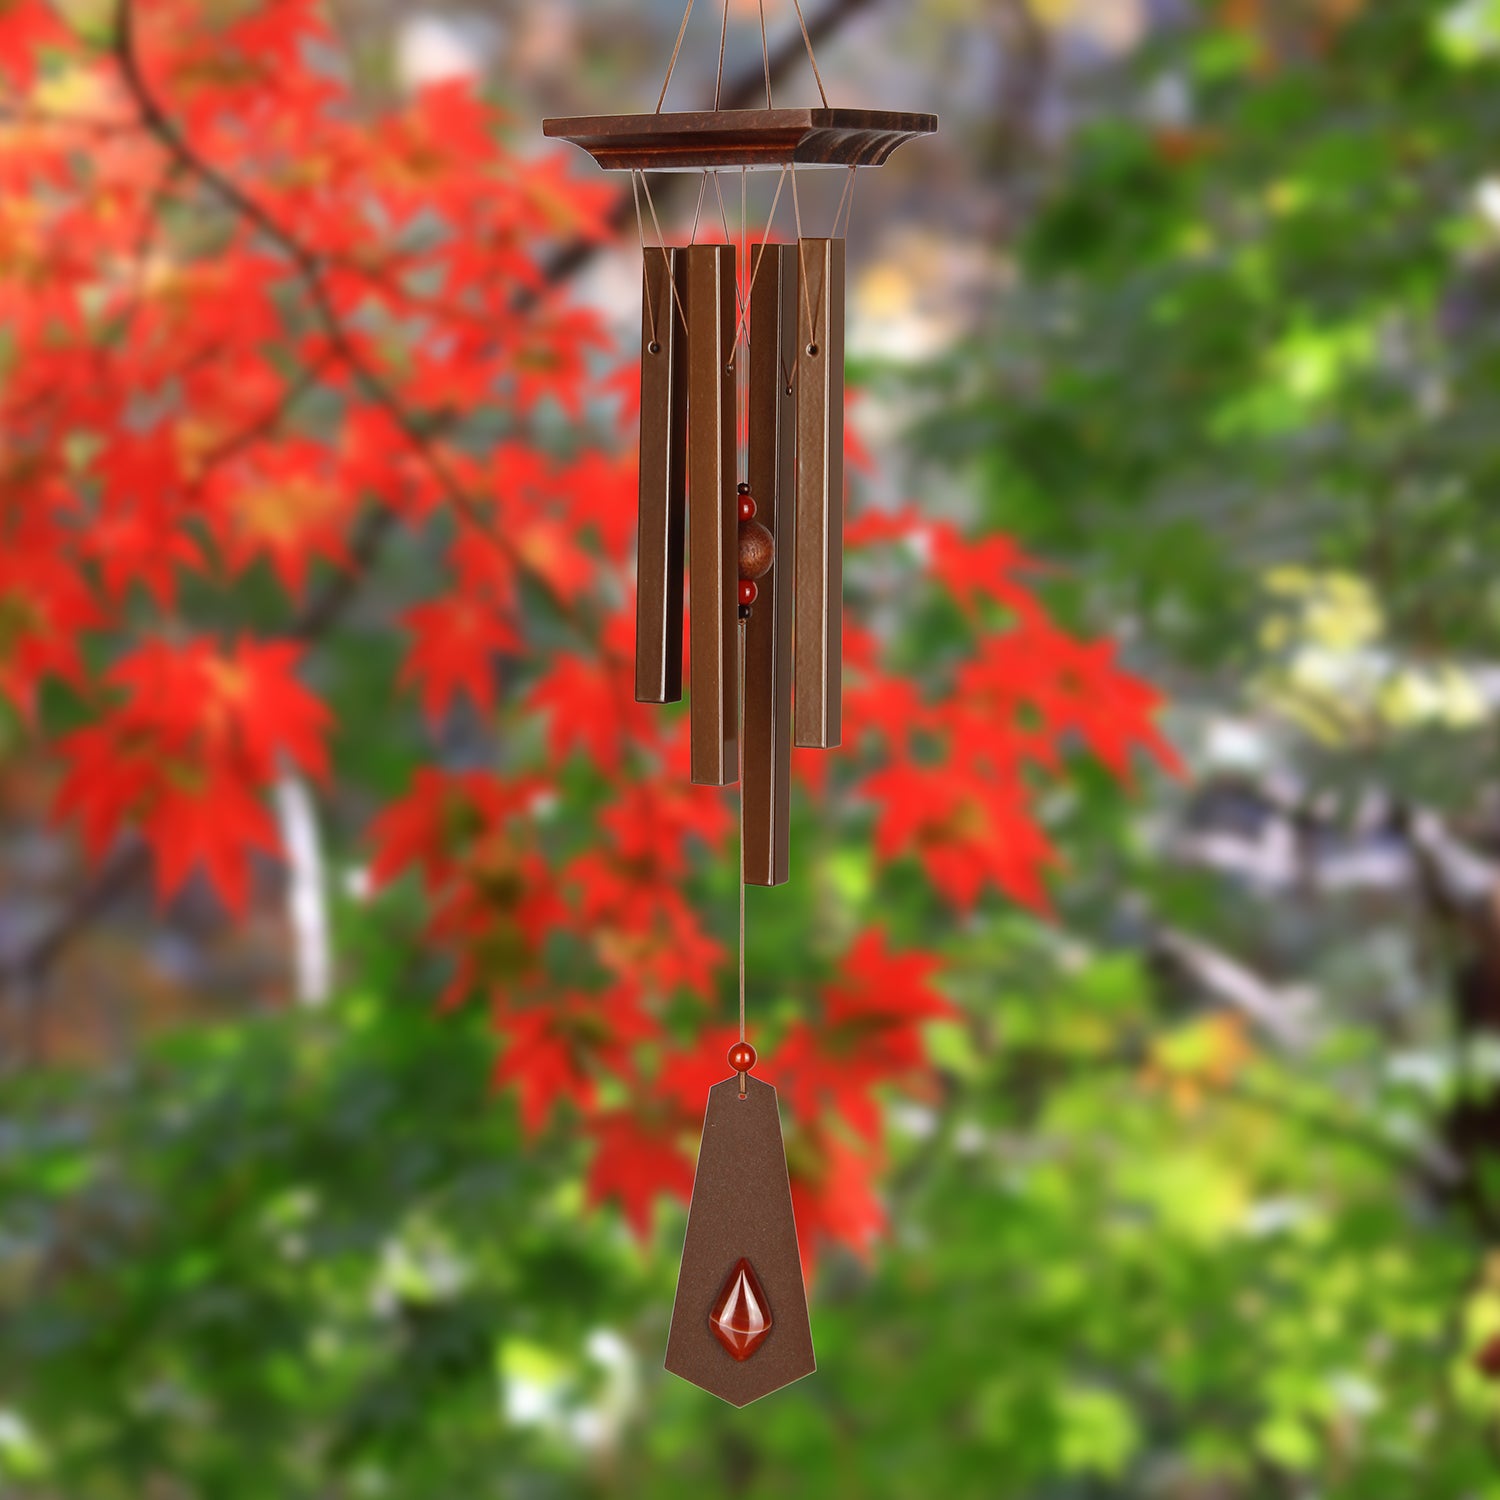 Woodstock Rustic Chime - Amber lifestyle image